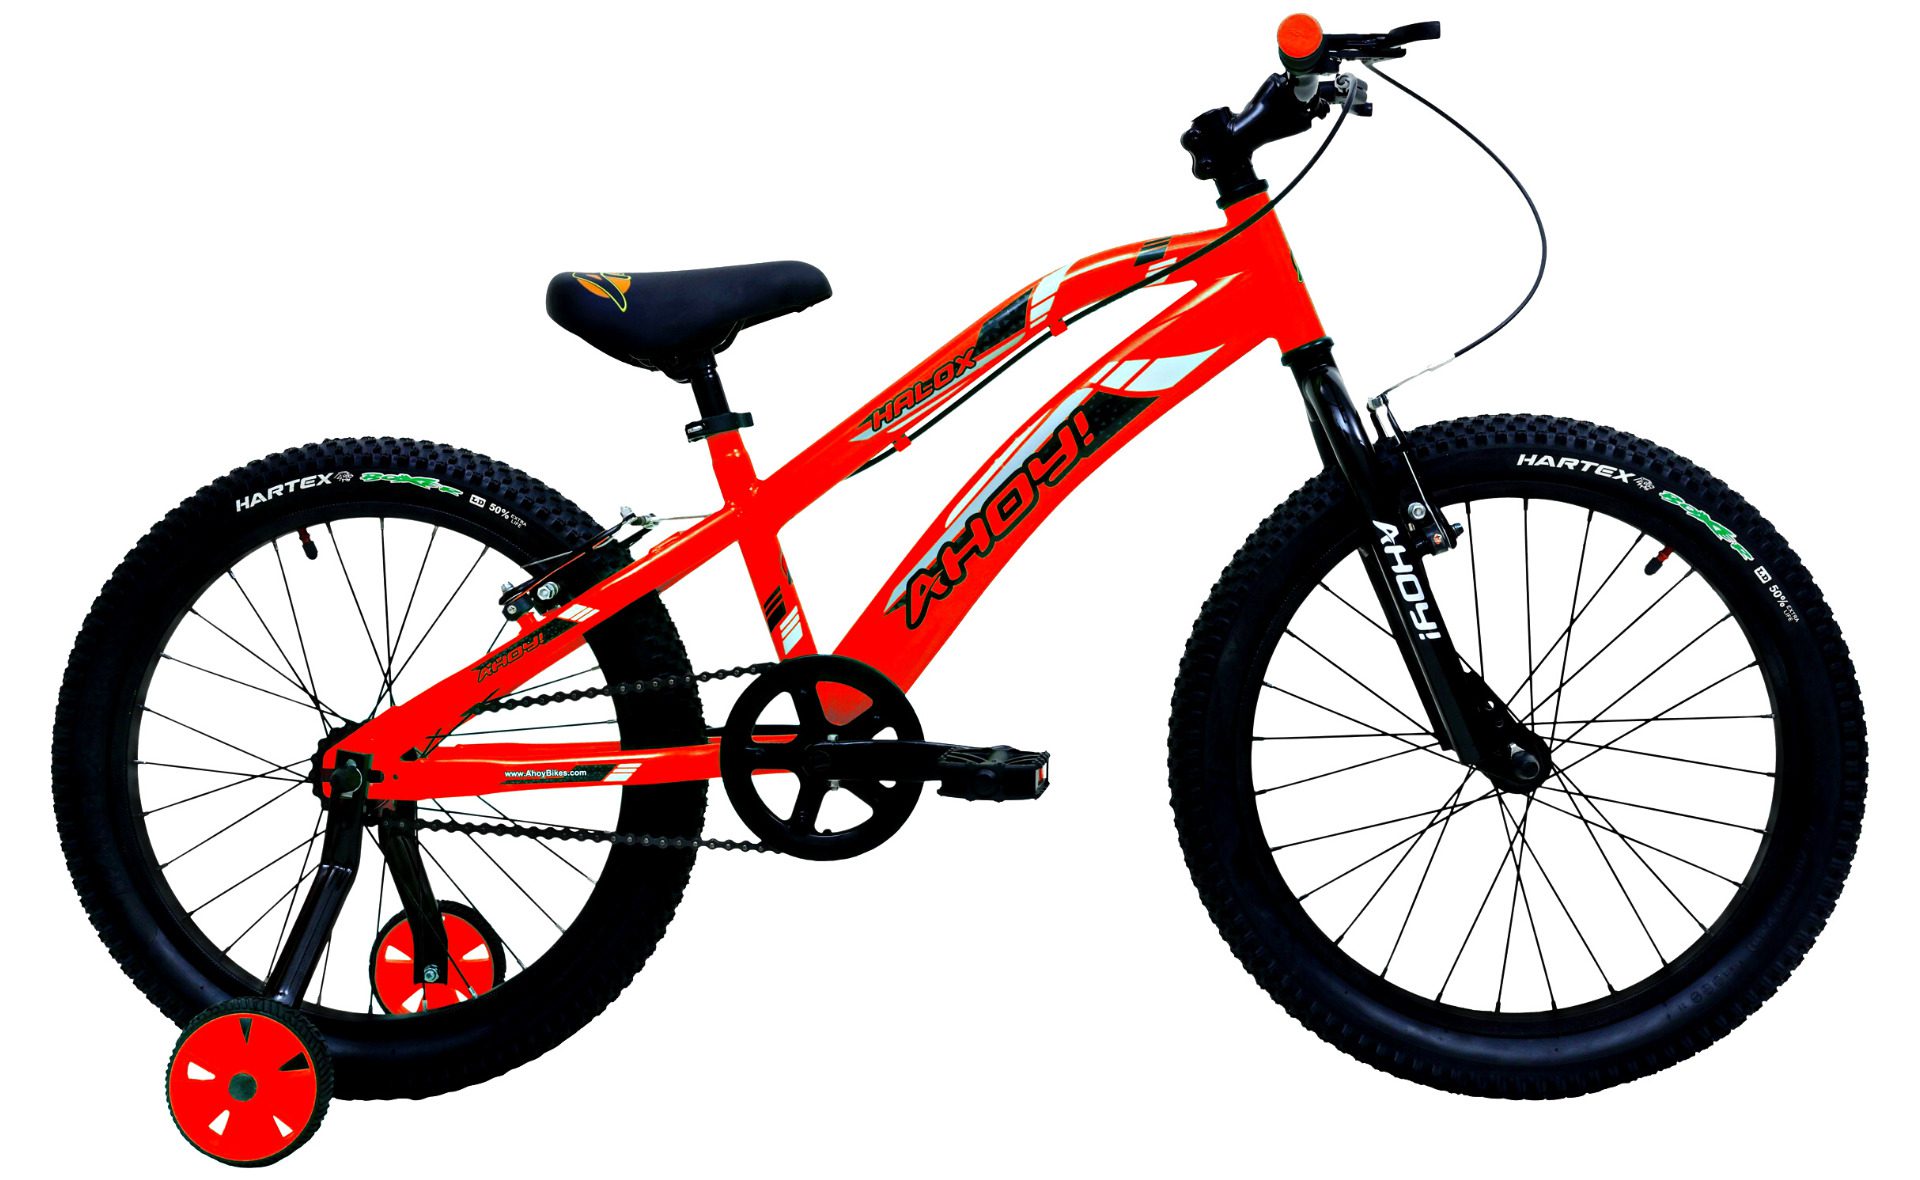 Halox Junior Bike Single Speed 20T | Buy Red Cycle Non Gear for Kids